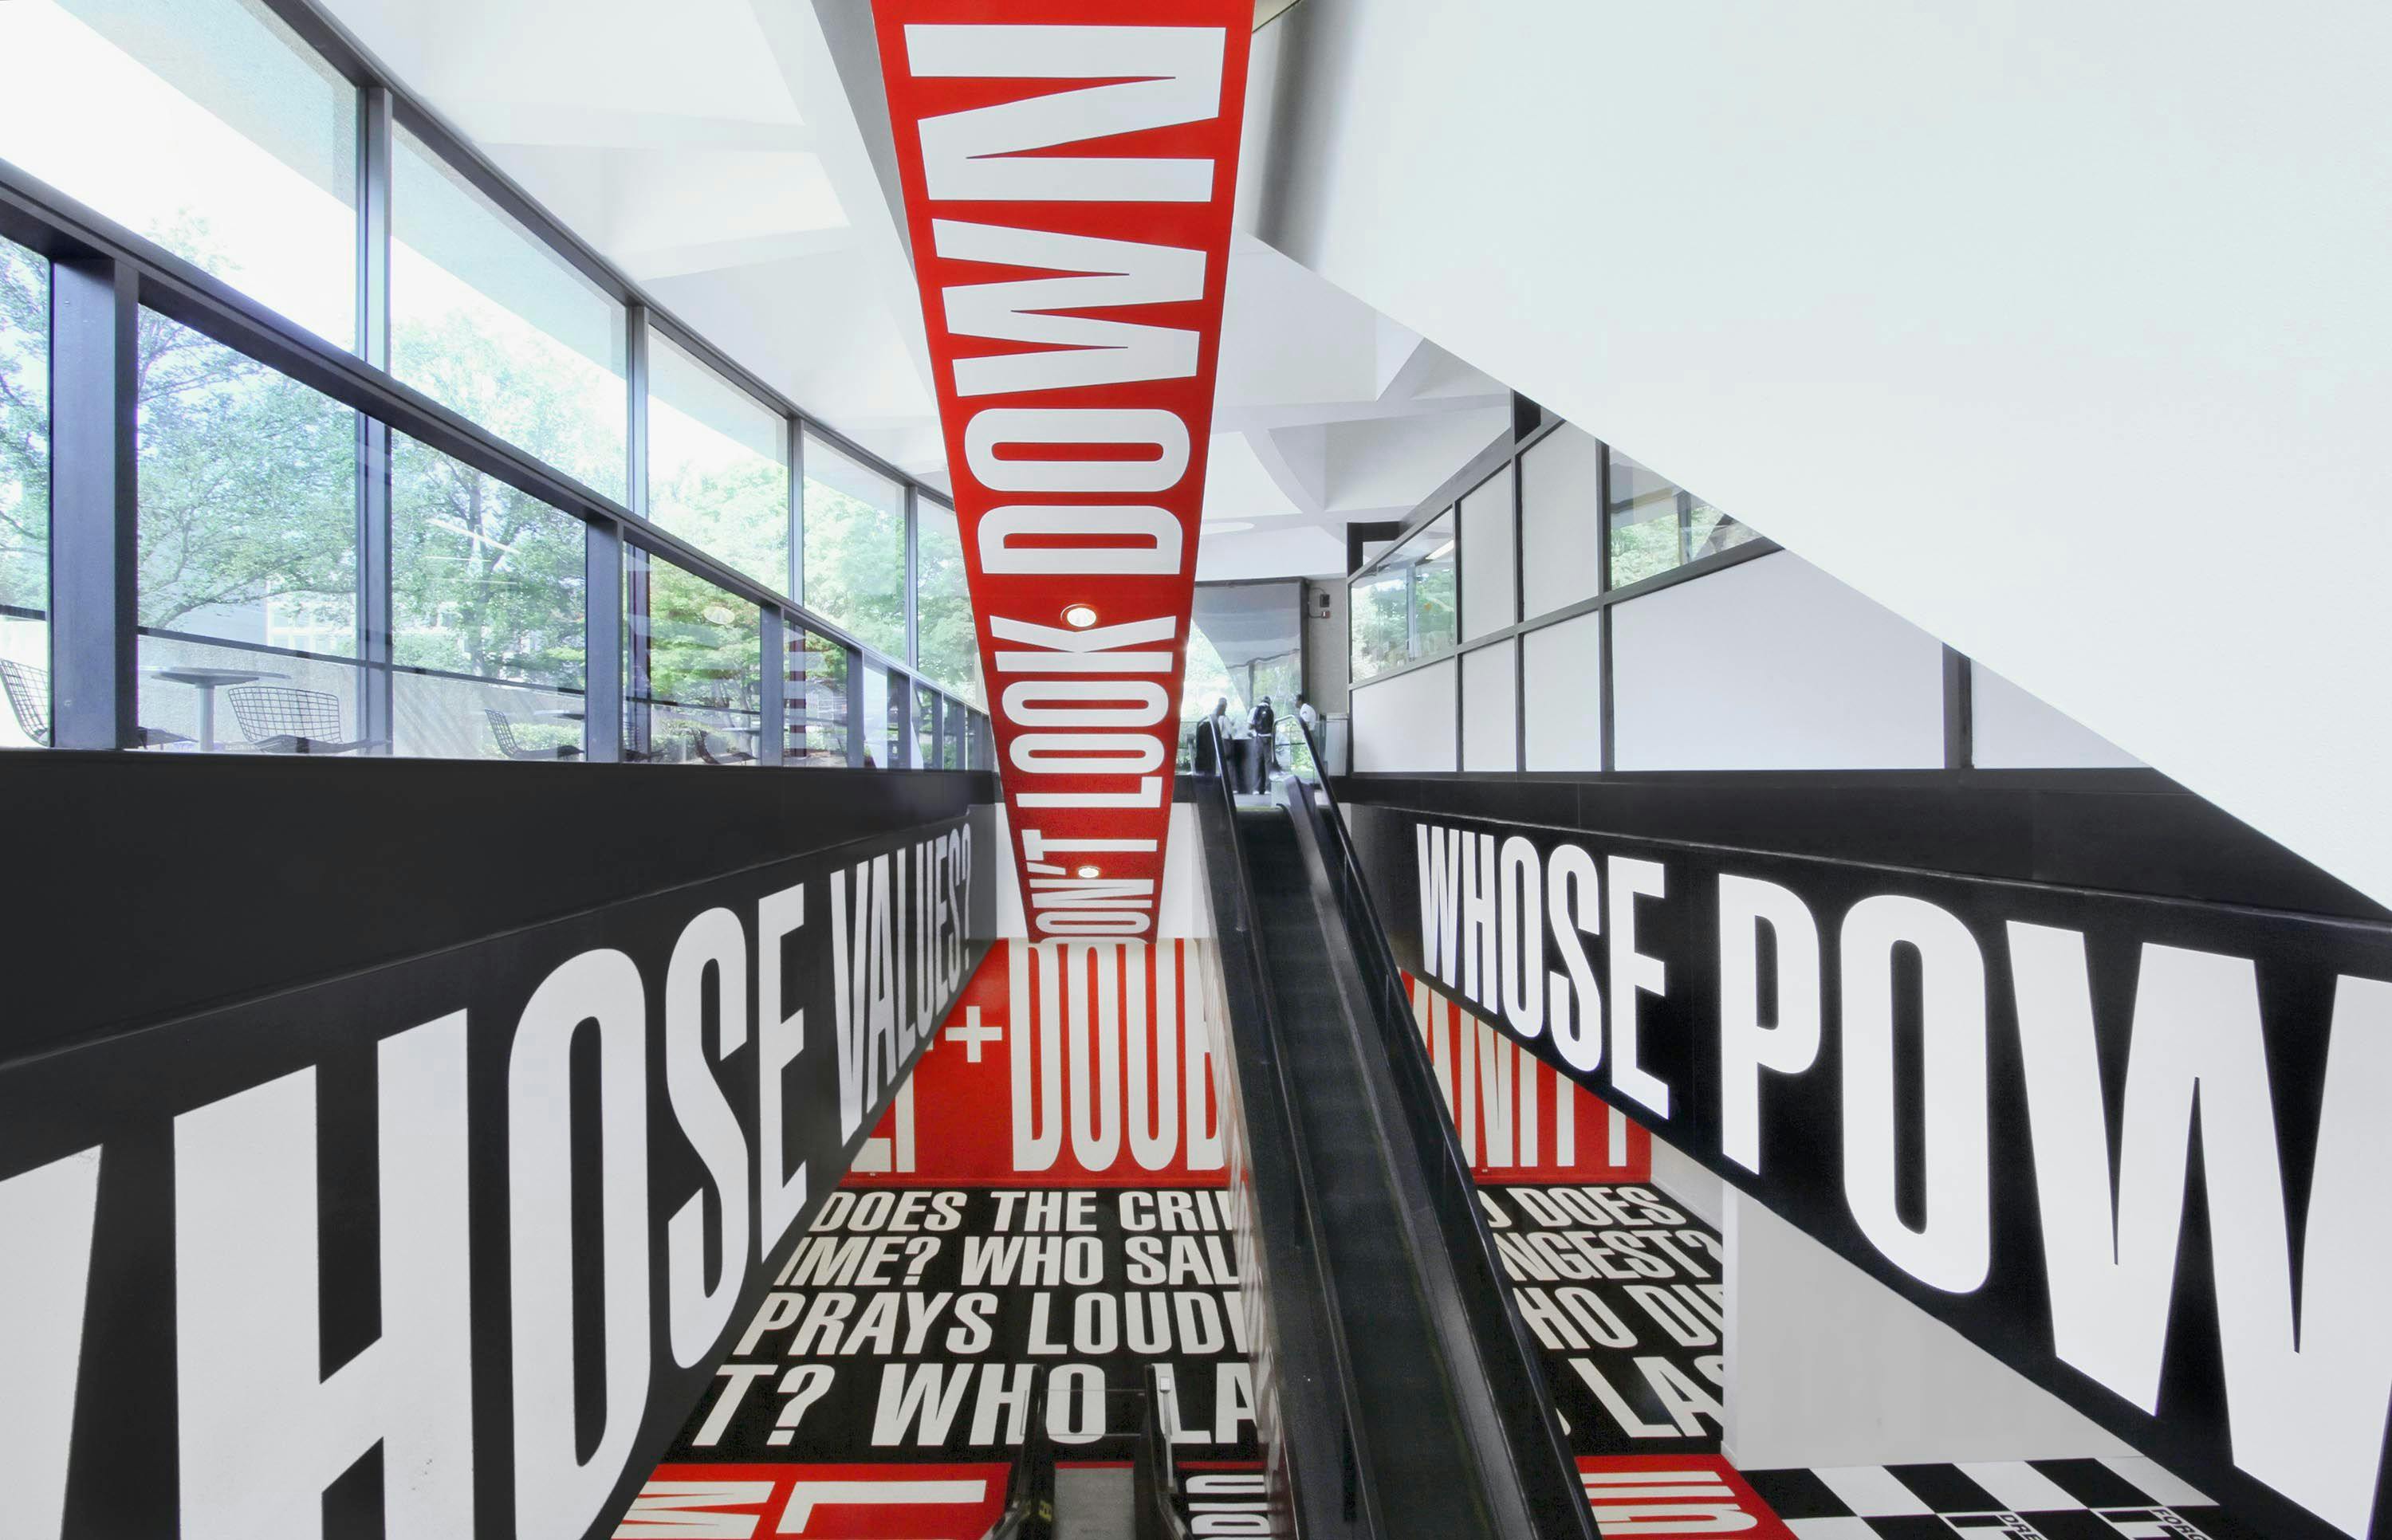 Installation view of the exhibition, Barbara Kruger: Belief plus Doubt, at the Hirshhorm Museum and Sculpture Garden in Washington, DC, dated 2012 to present.